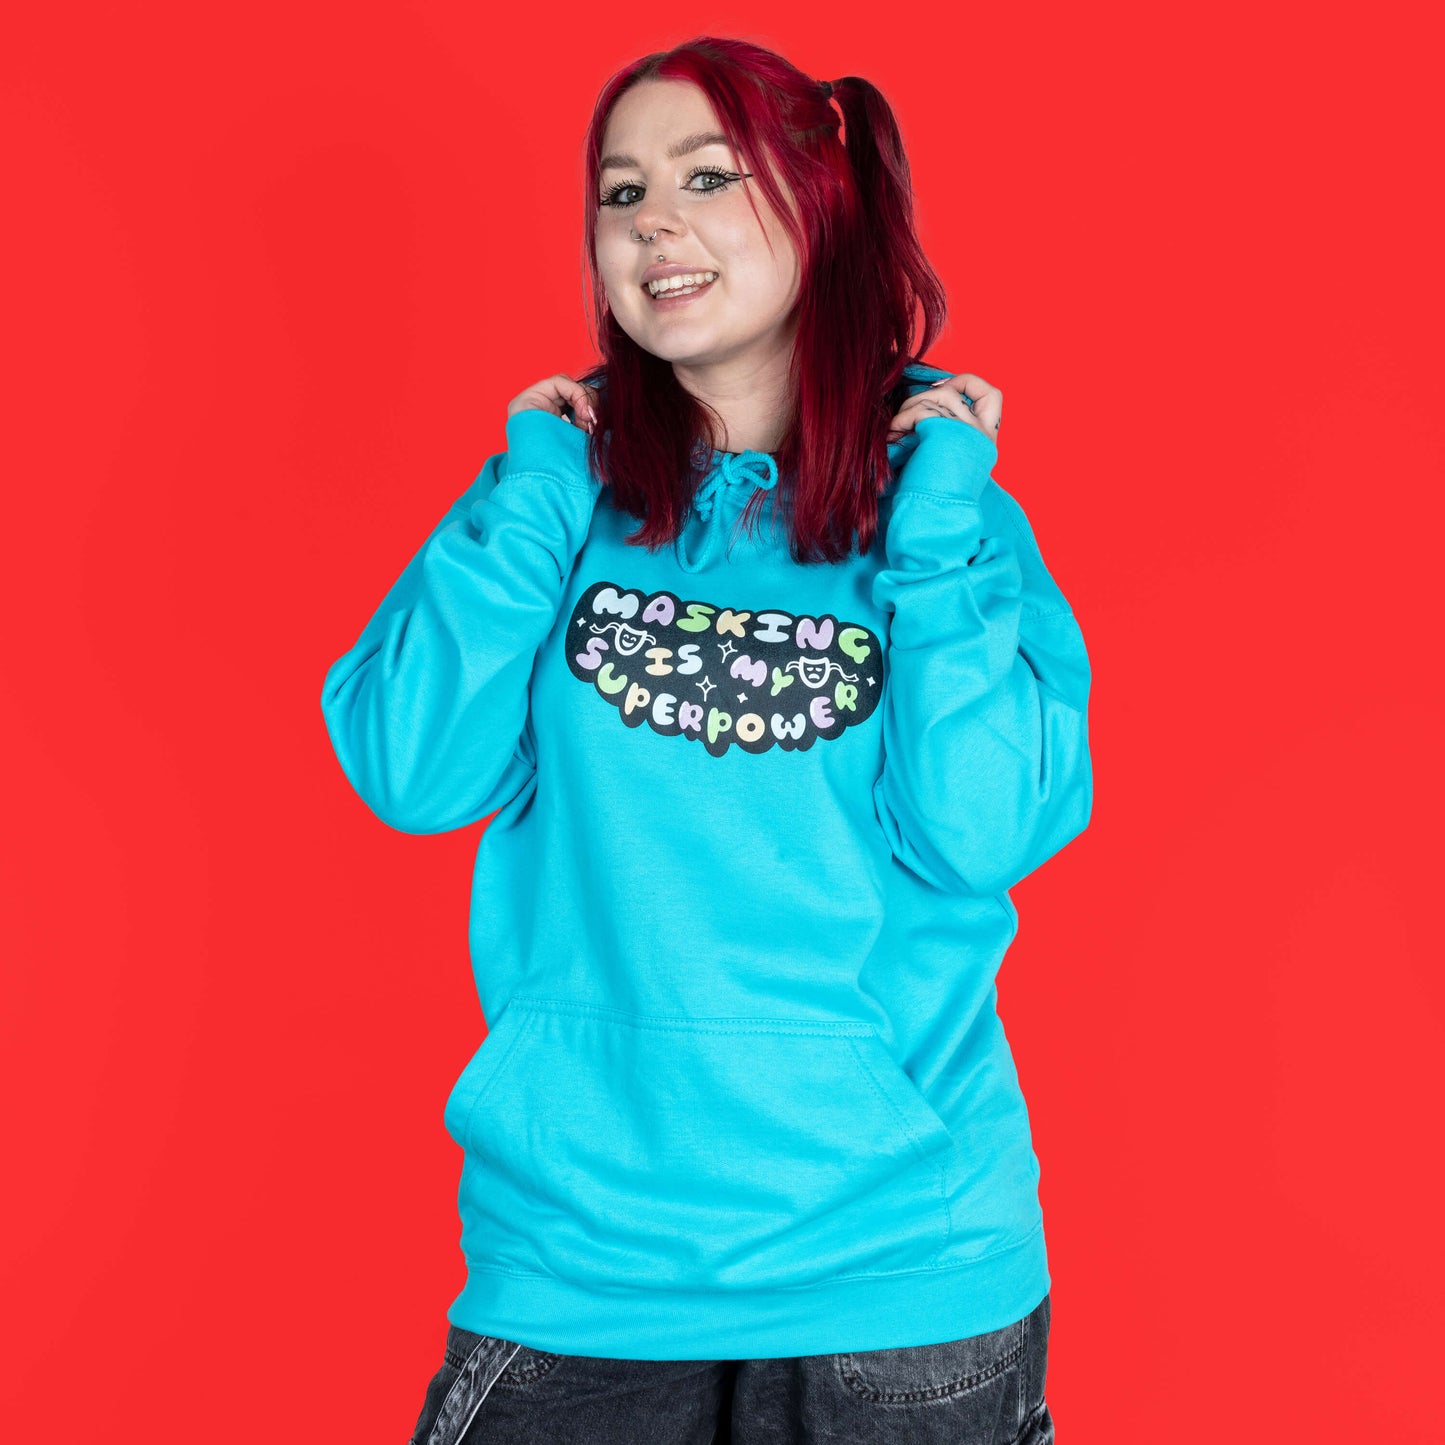 The Masking Is My Super Power Hoodie in Turquoise Surf modelled by Flo with red hair and black eyeliner on a red background. She is facing forward smiling holding the hood. The aqua blue hoodie features pastel rainbow bubble writing that reads 'masking is my superpower' with white sparkles, a happy and sad drama masks all on a black oval. Raising awareness for neurodivergent people with ADHD or Autism.